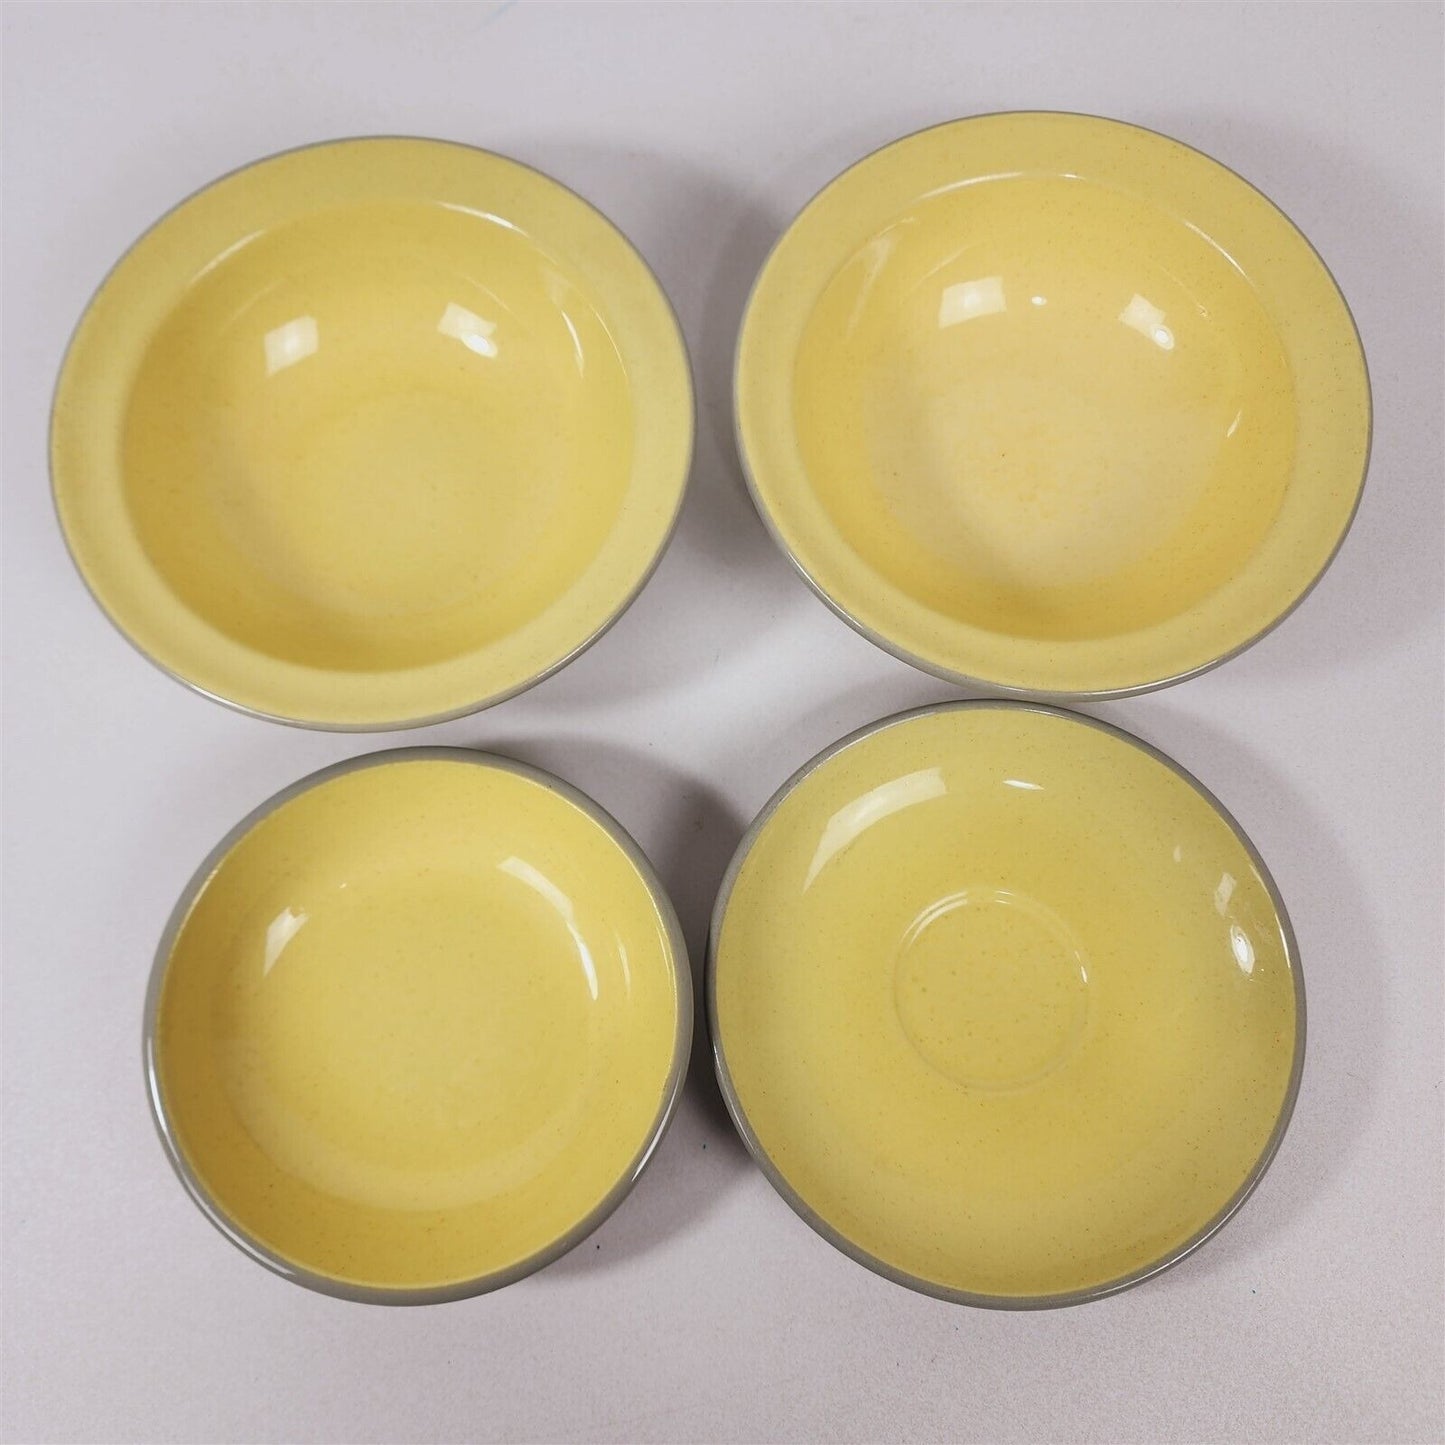 4 Pcs Vintage Harkerware Stoneware Speckled Yellow Gray Cereal Berry Bowl Saucer